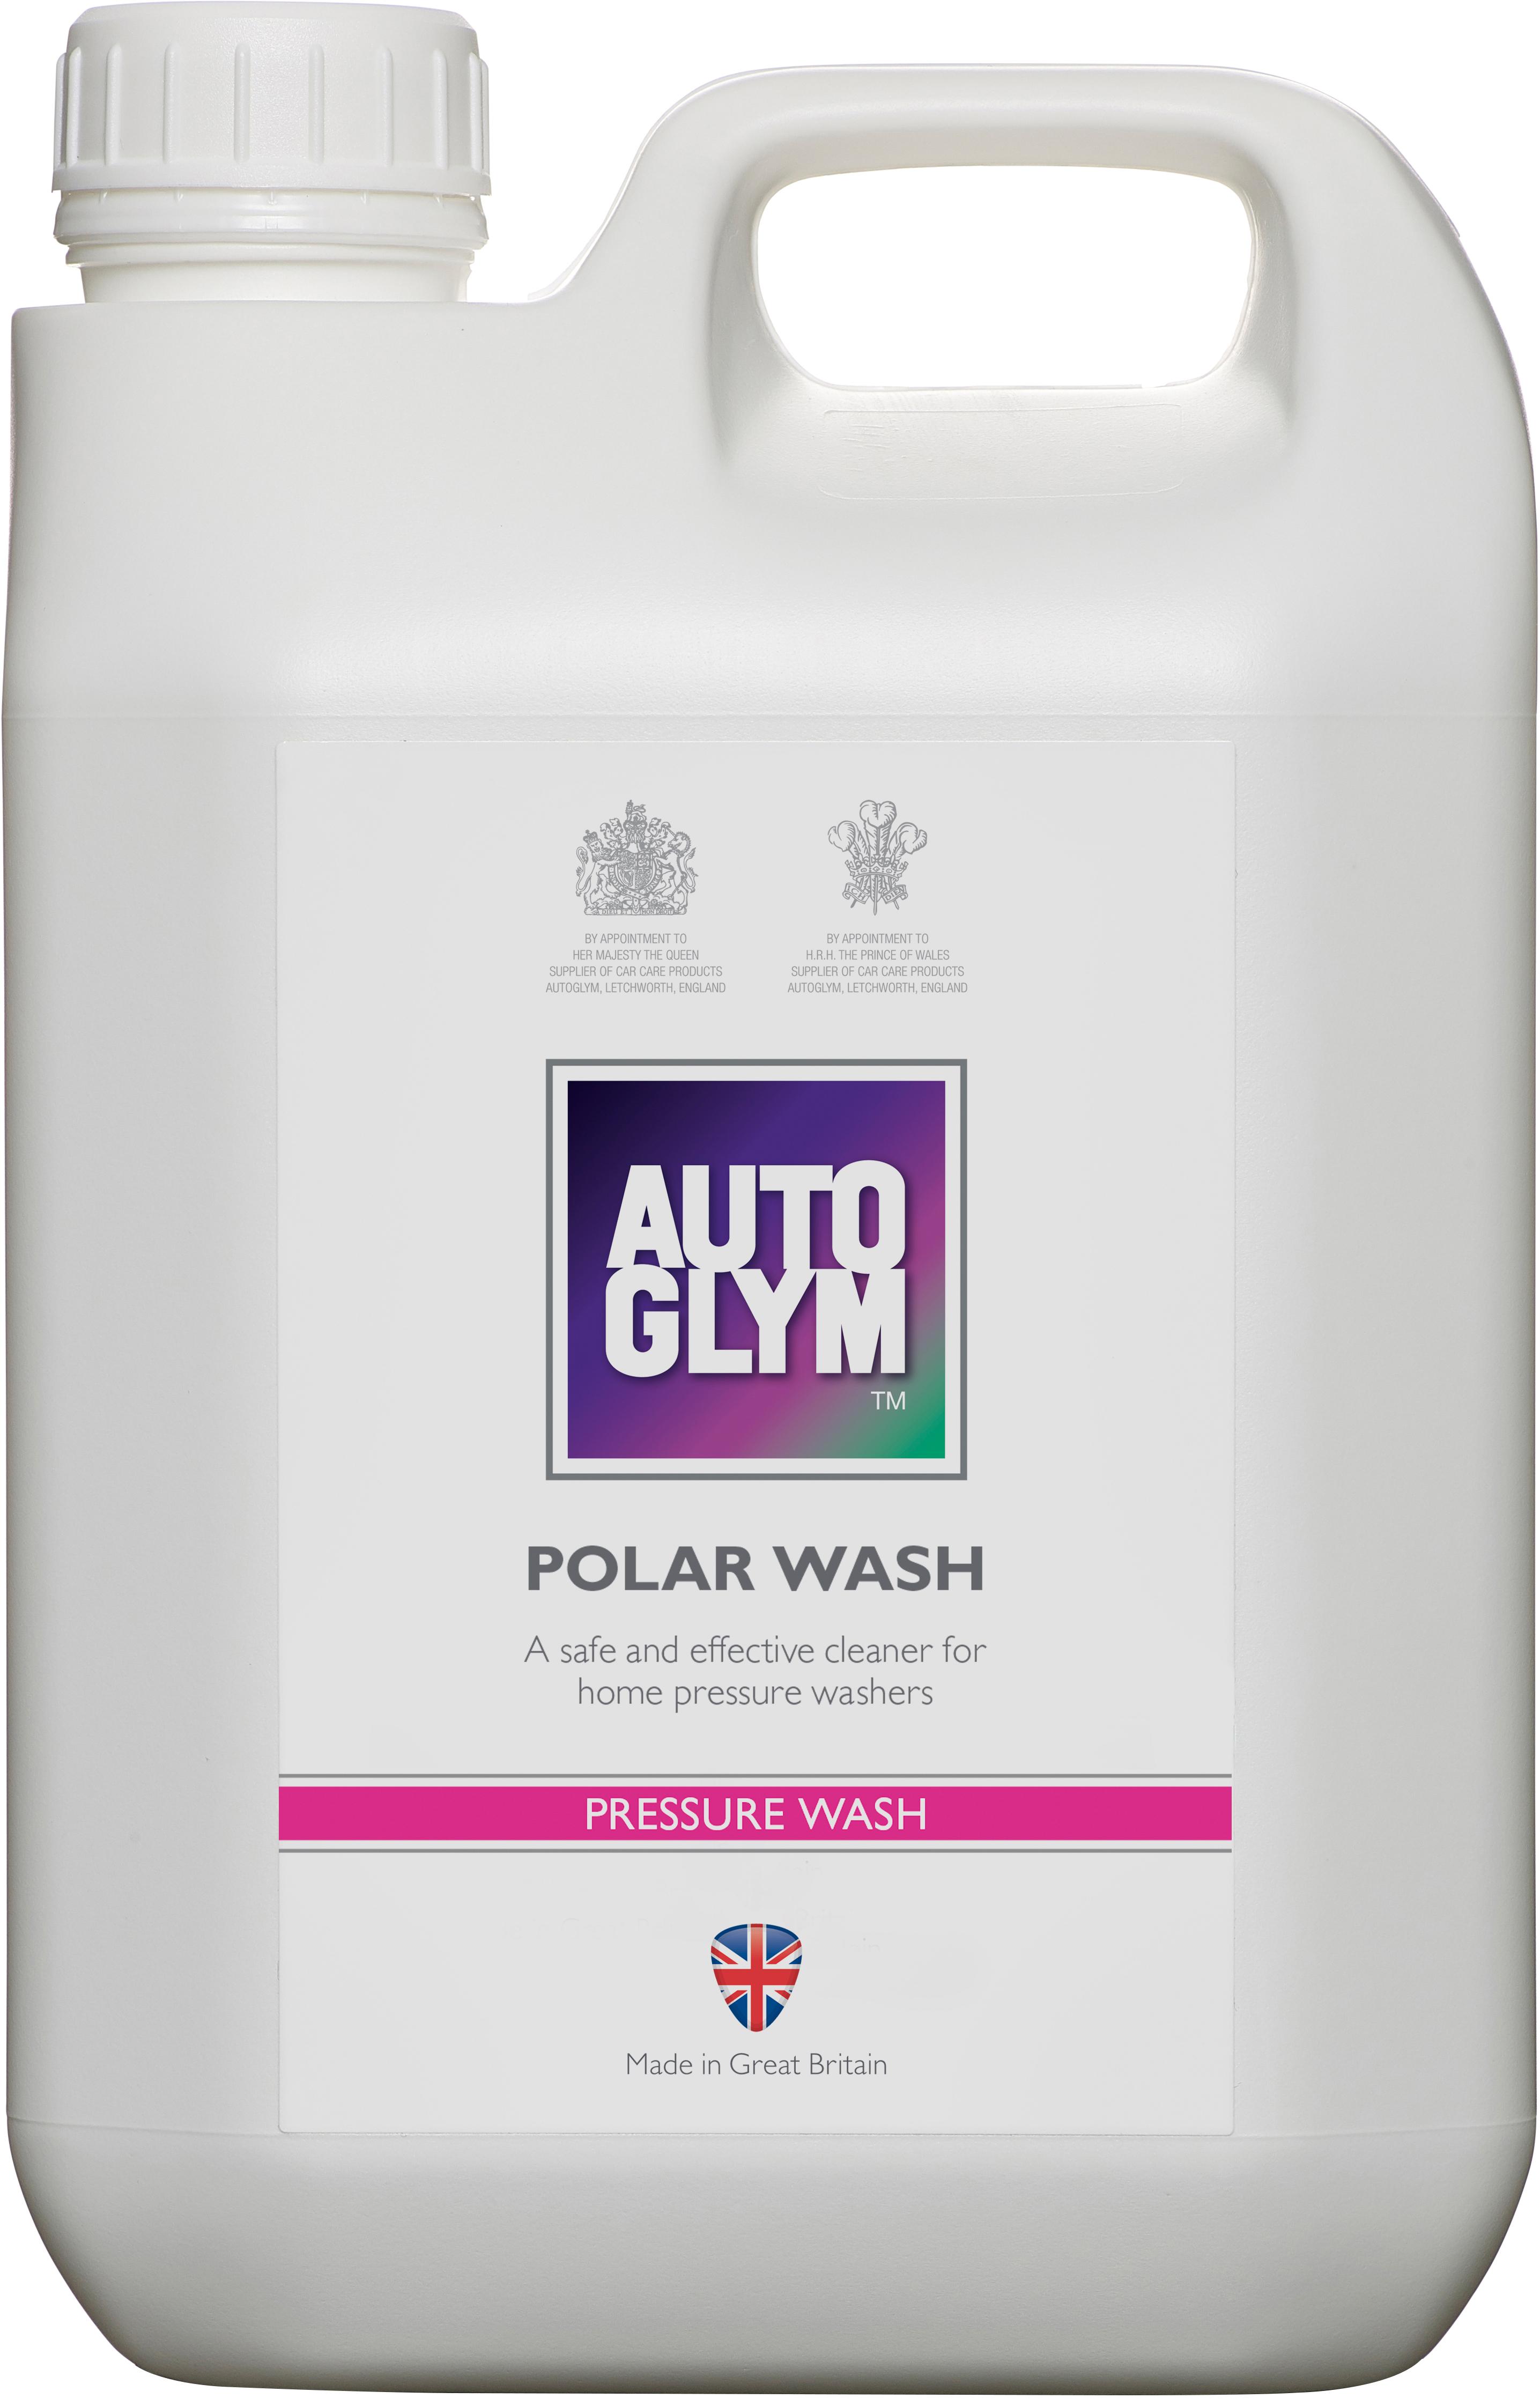 What Is The Best Snow Foam & Detergent & Why?